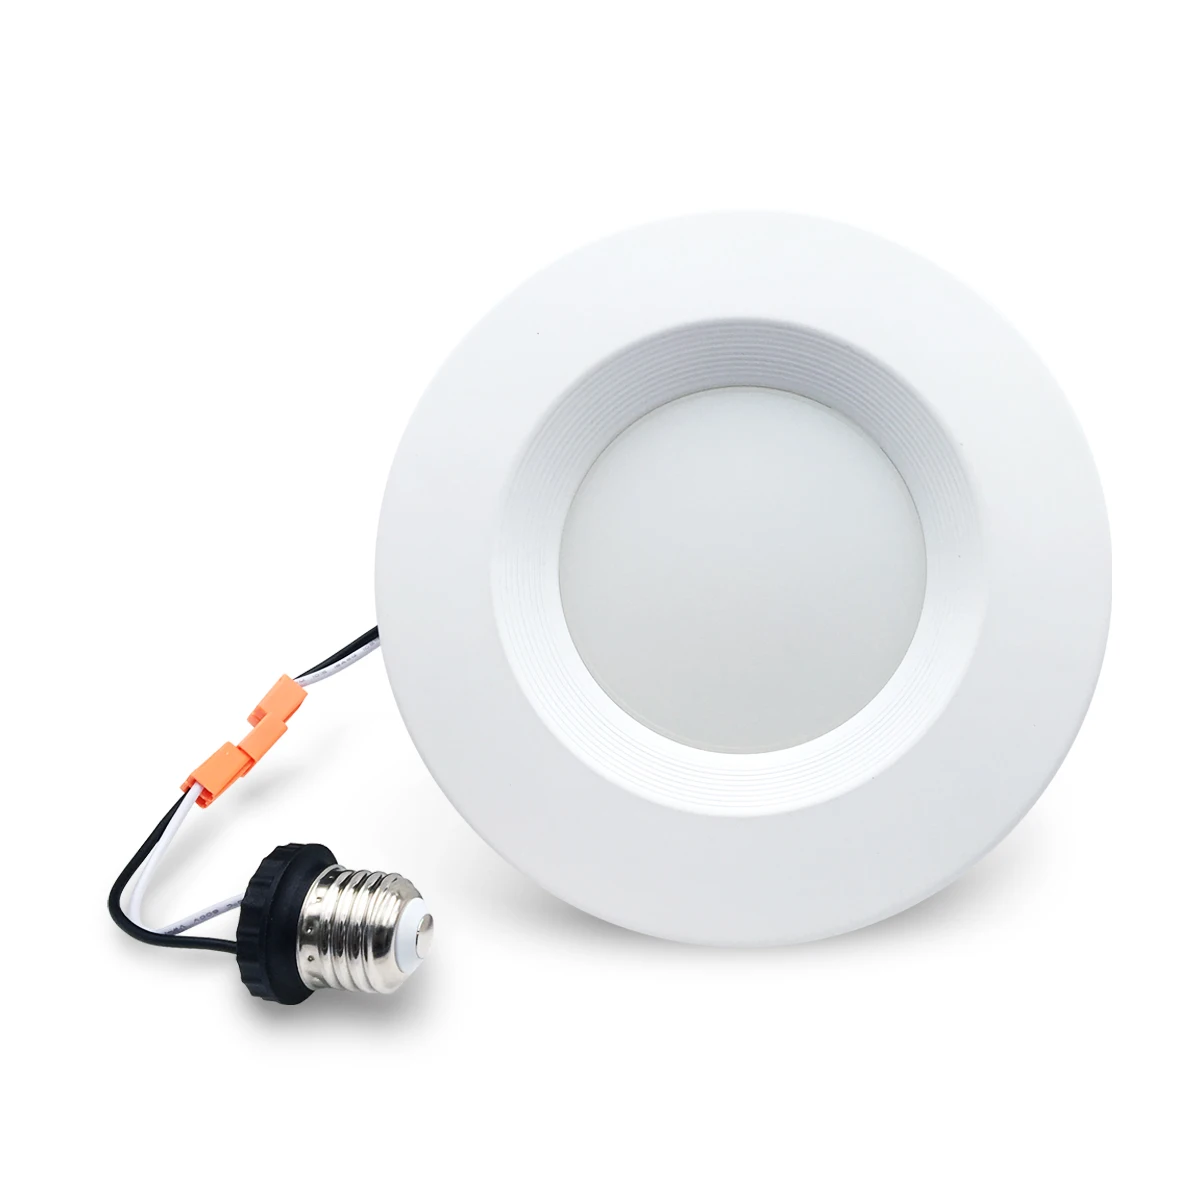 Anti glare 3CCT tunable lutron dimmer dimmable LED retrofit downlight with Smooth trim  3inch 4 inch 6inch  deeper pot light